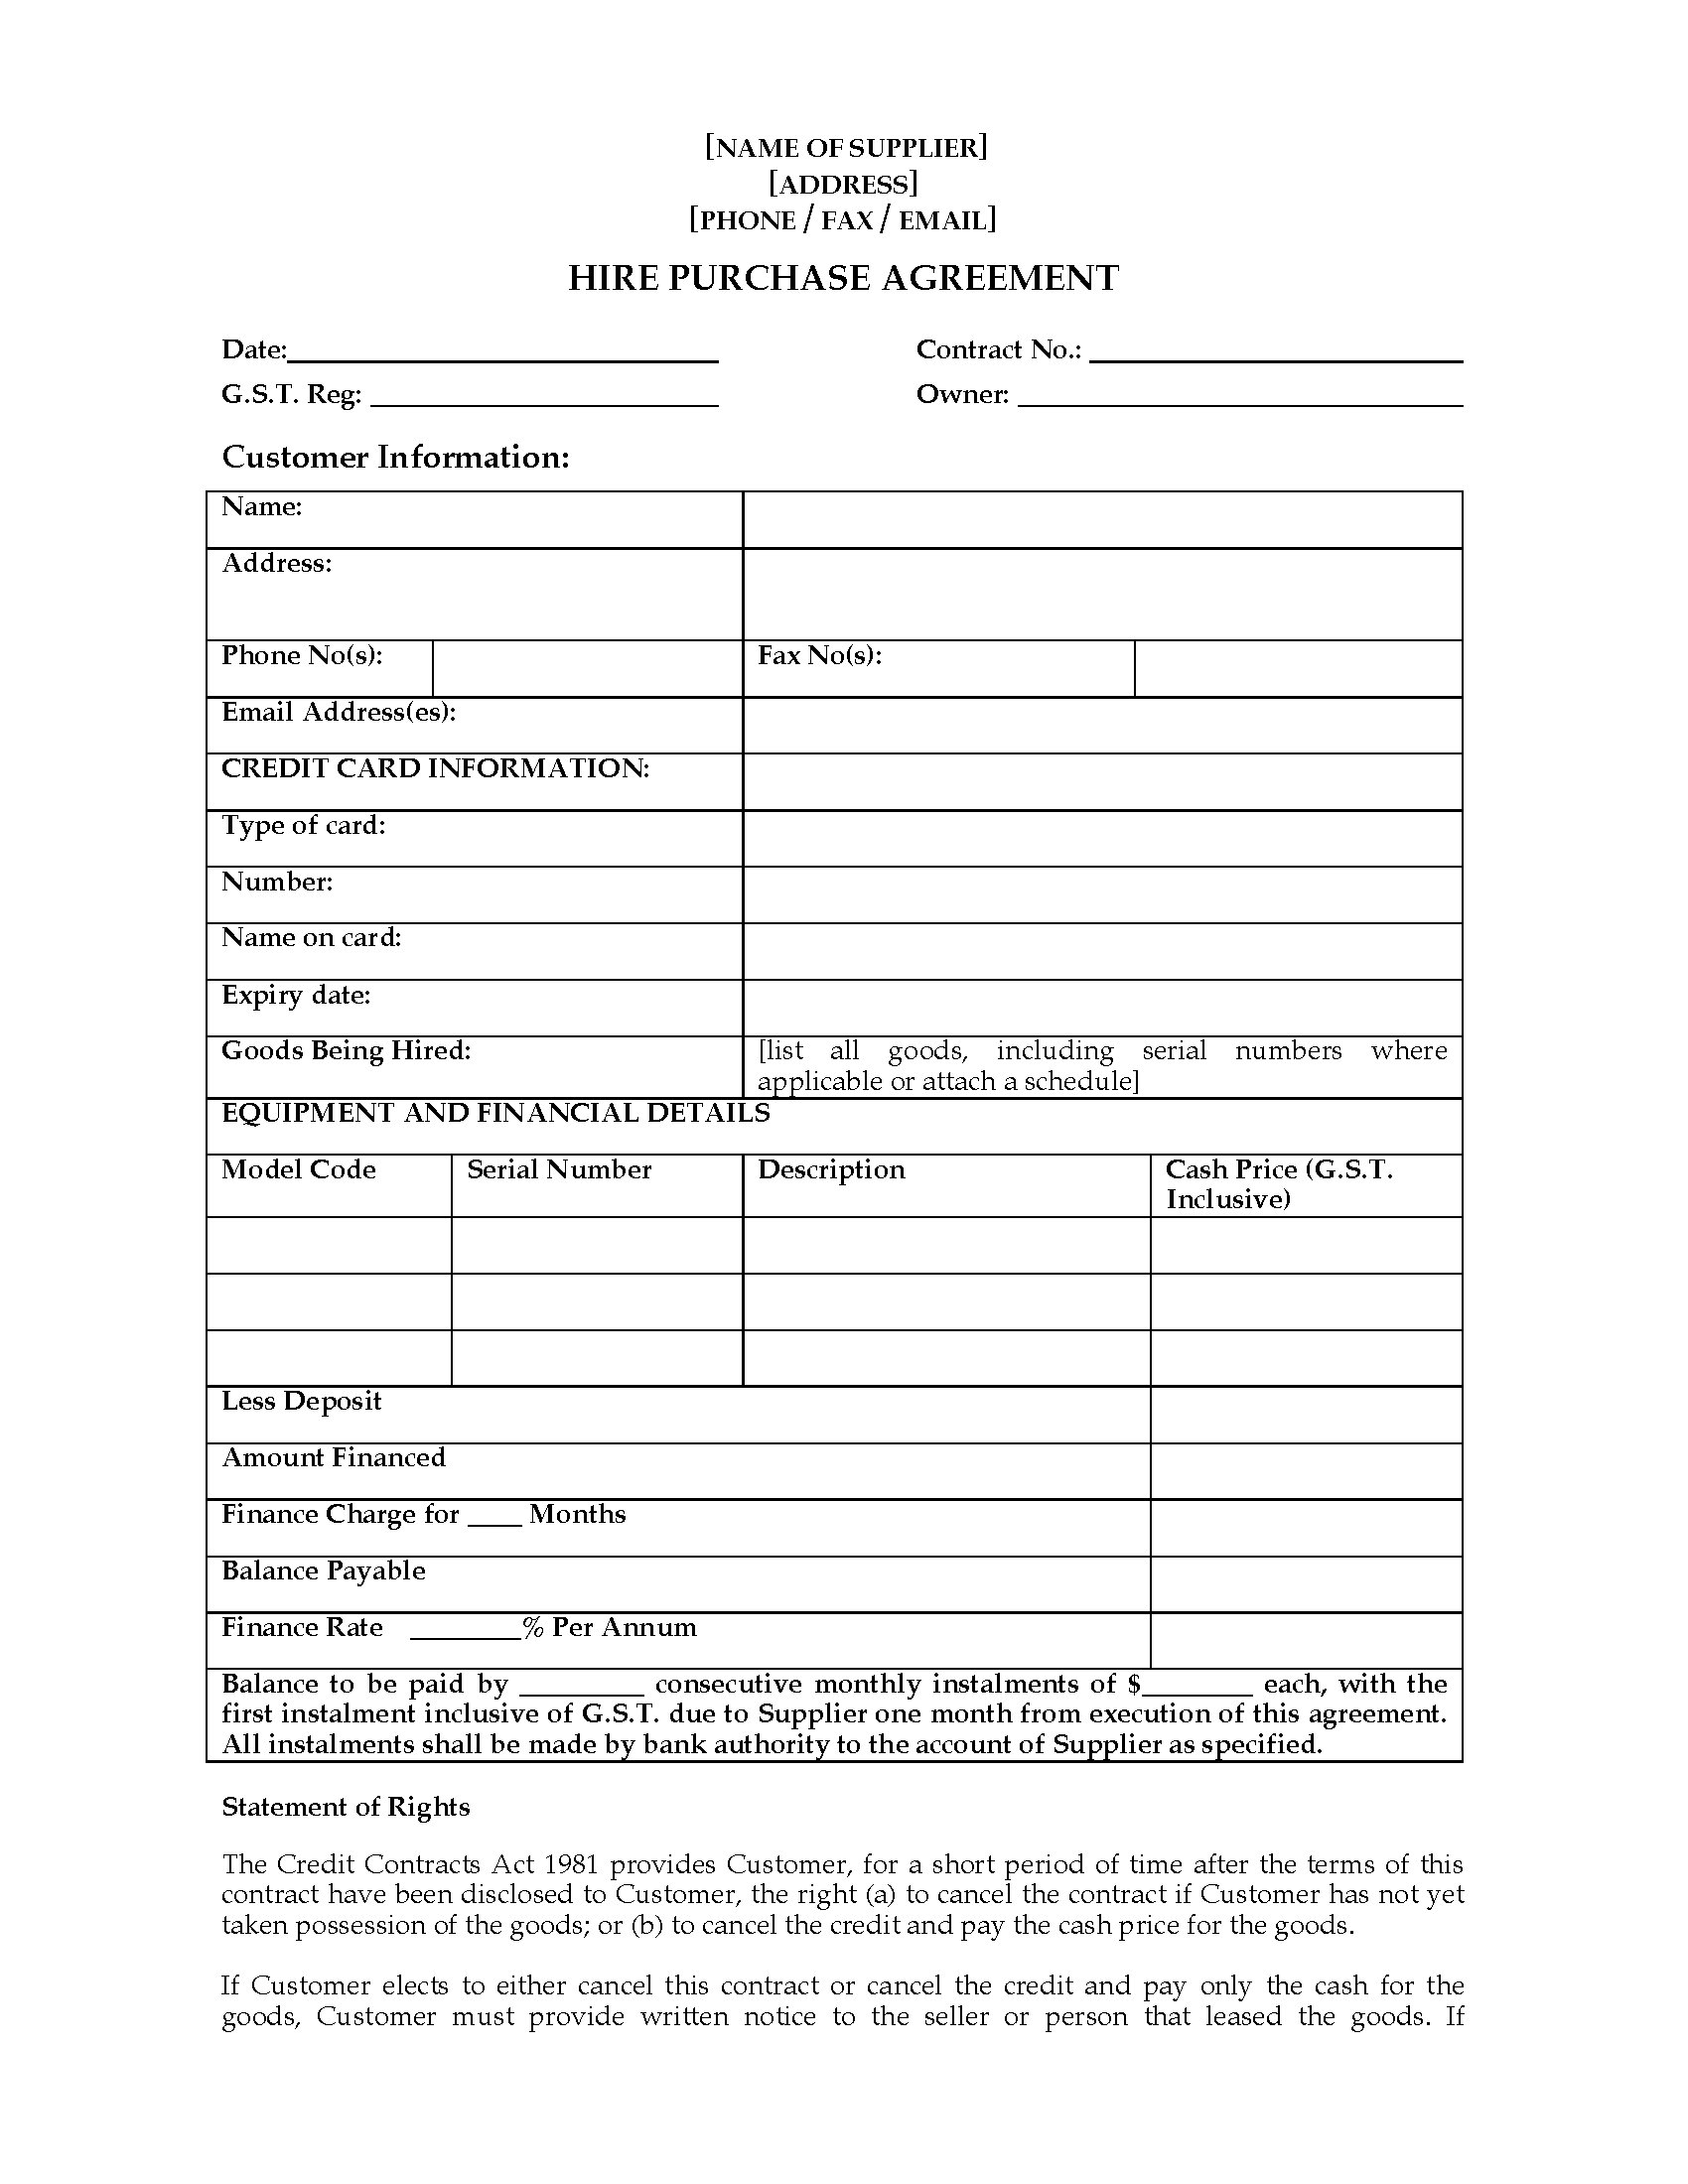 New Zealand Equipment Hire Purchase Agreement Form  Legal Forms In rental agreement template new zealand